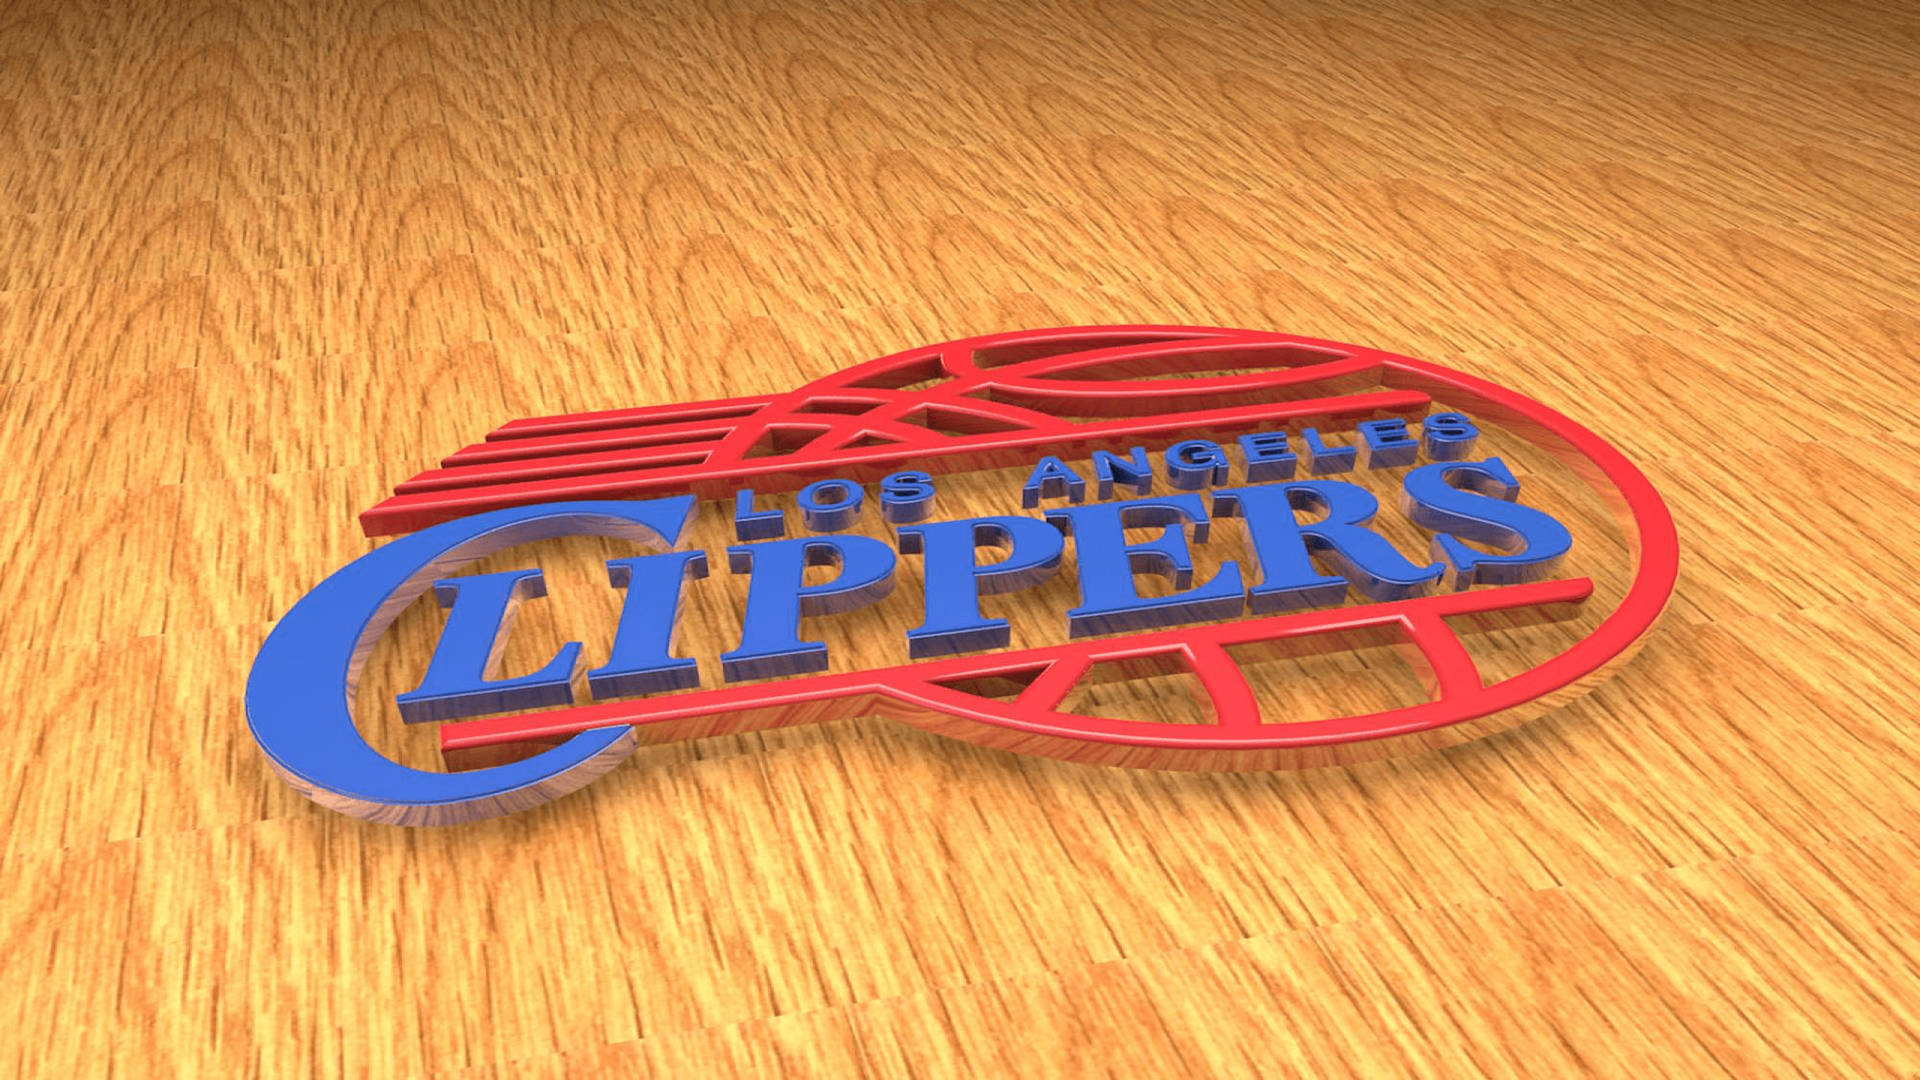 Los Angeles Clippers 3d 1984 Logo